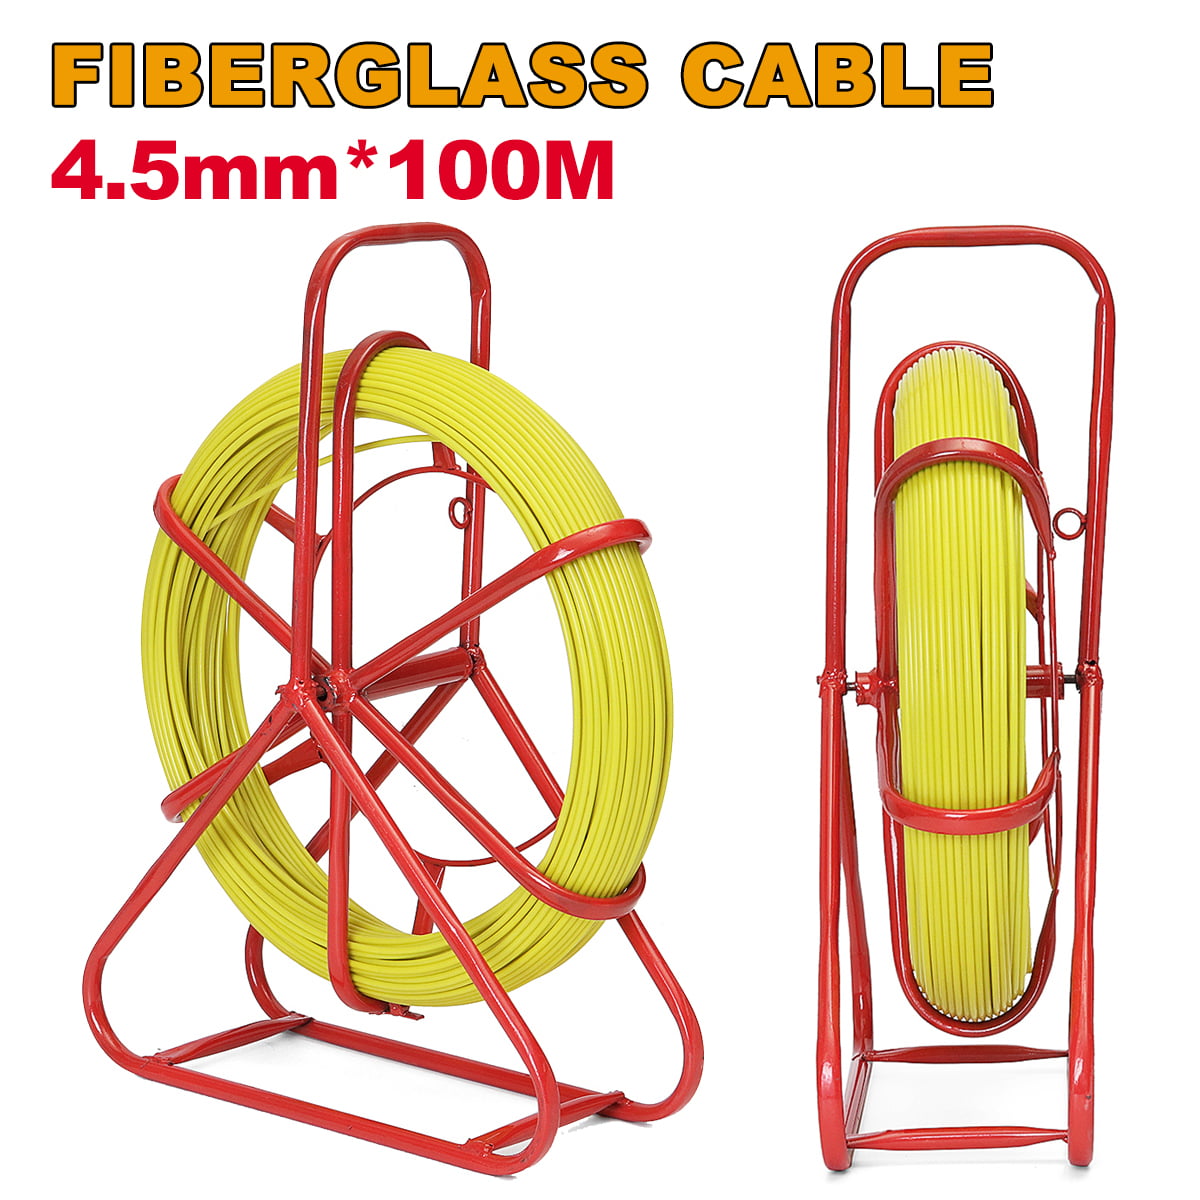 8mm 100m/328ft Fish Tape Fiberglass Wire Cable Running Rod Duct Rodder Puller 